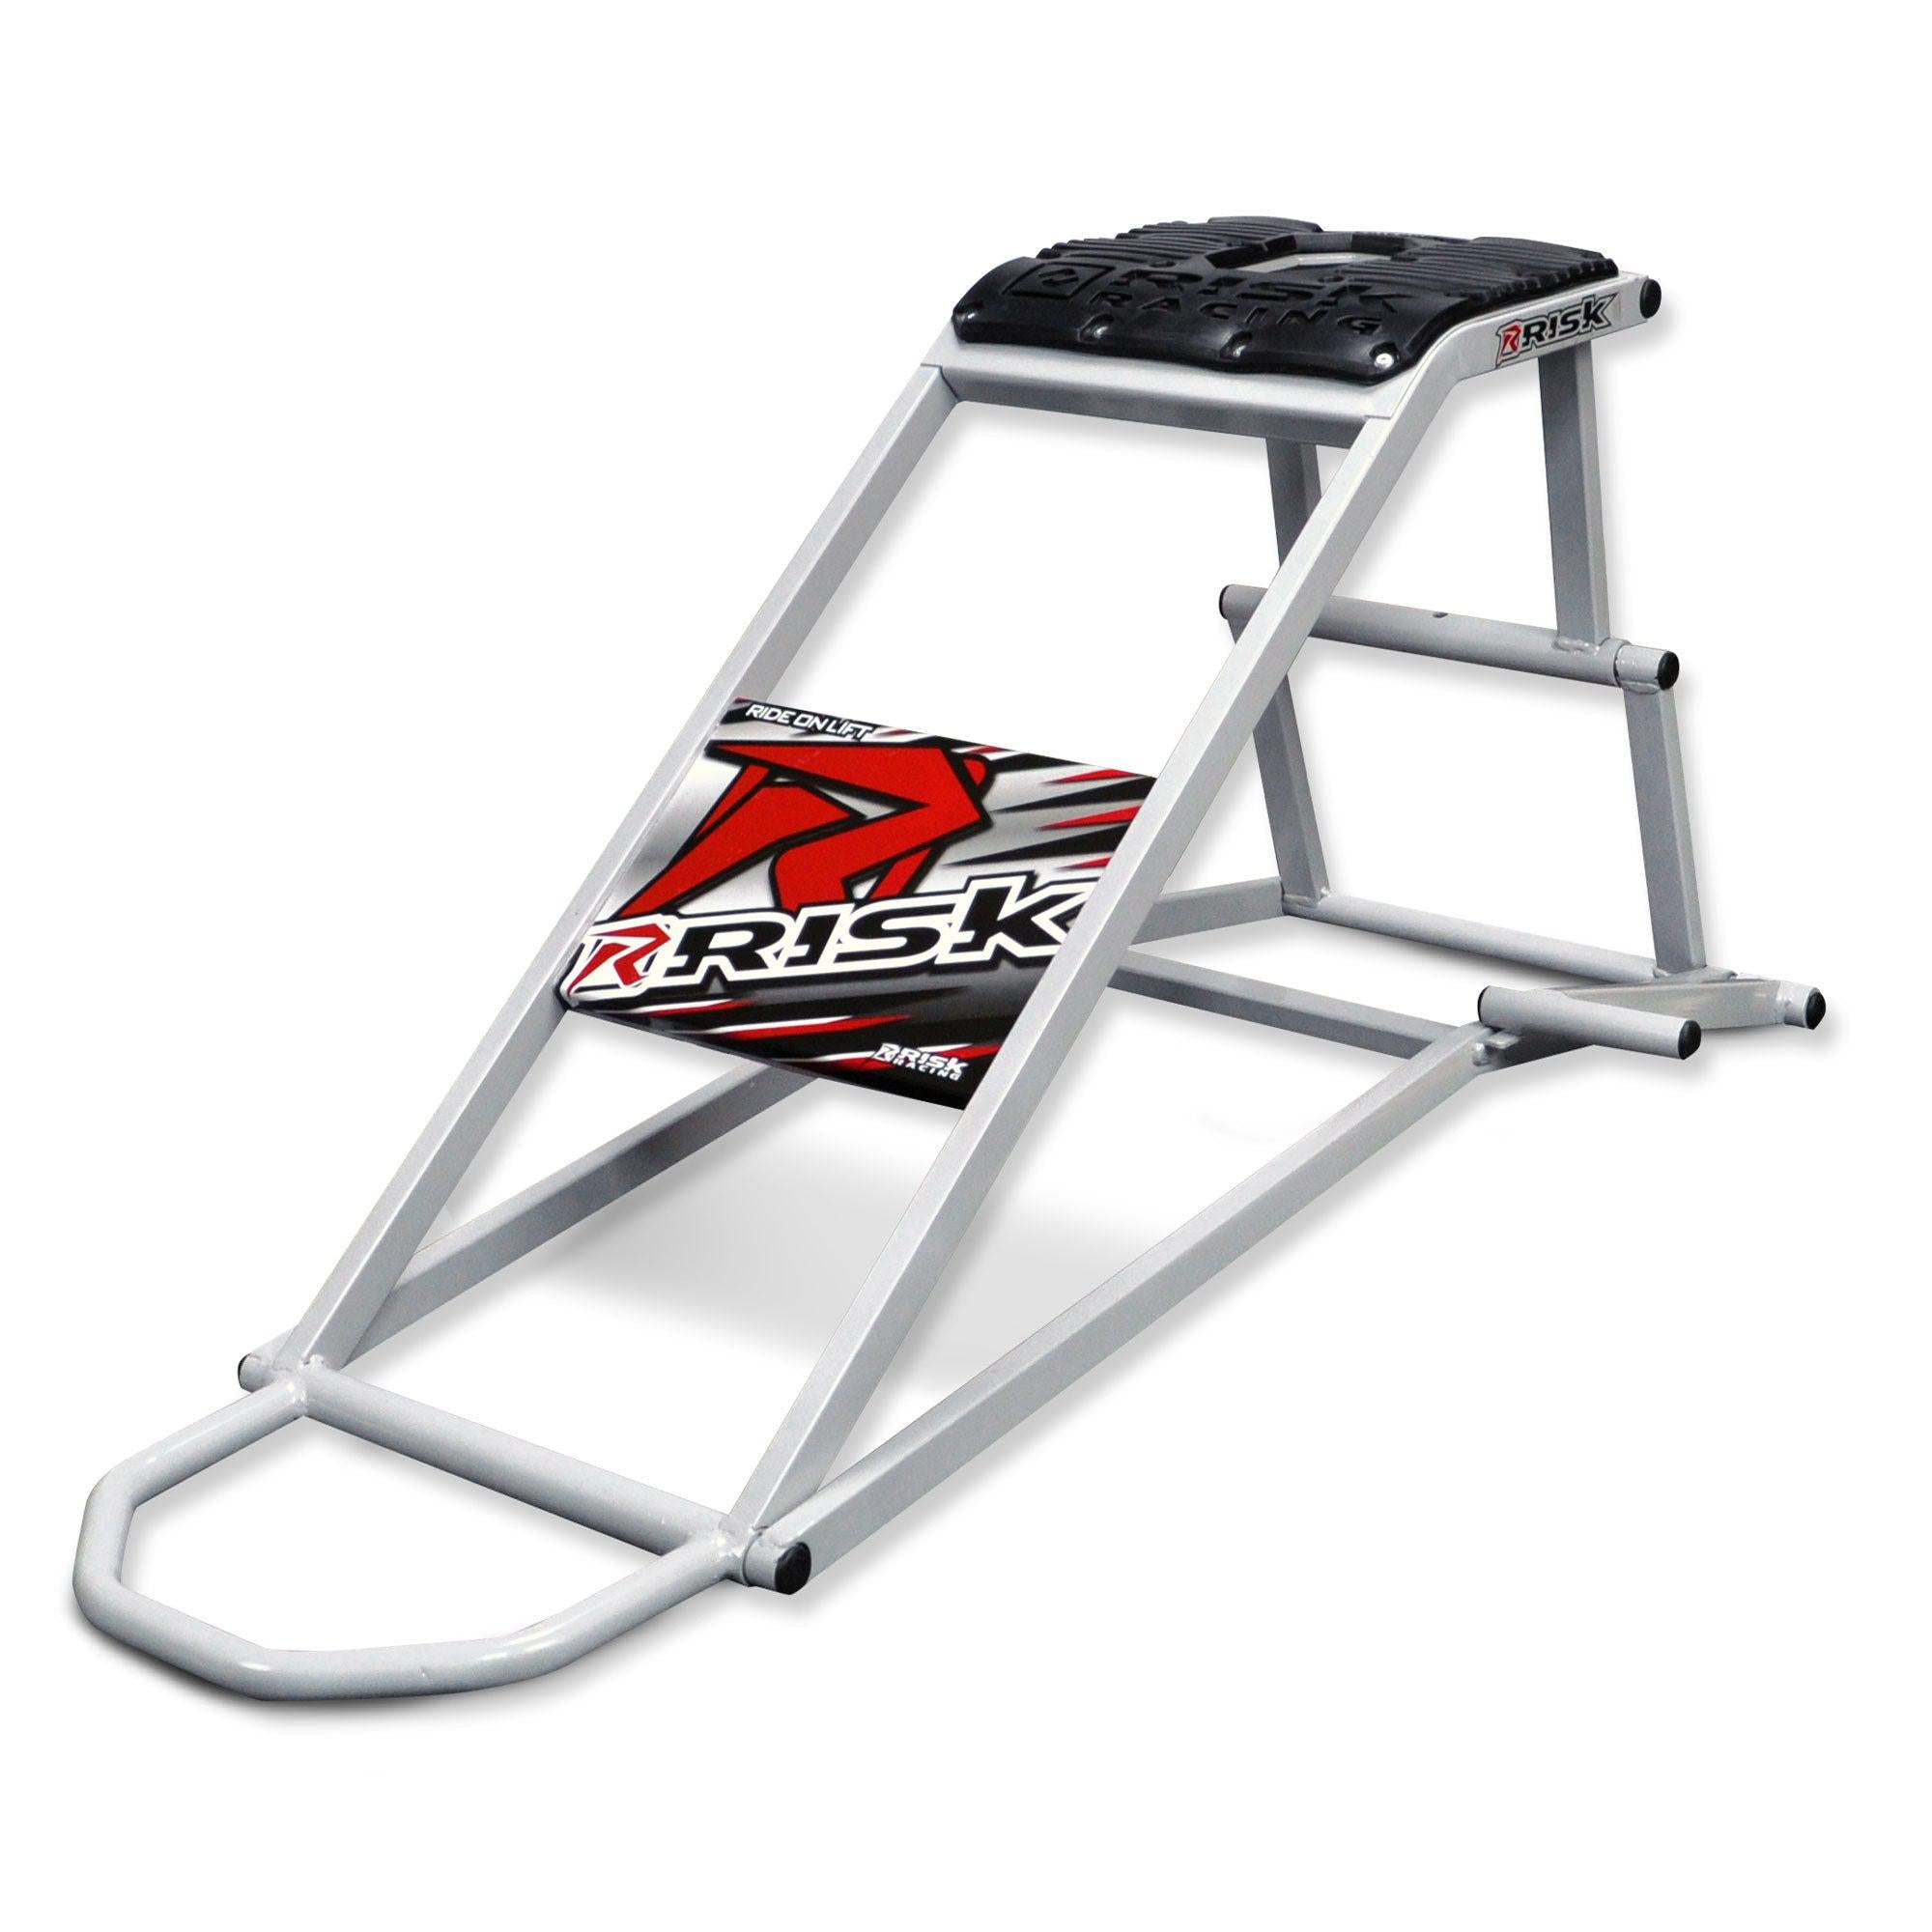 Ride-On lift/stand